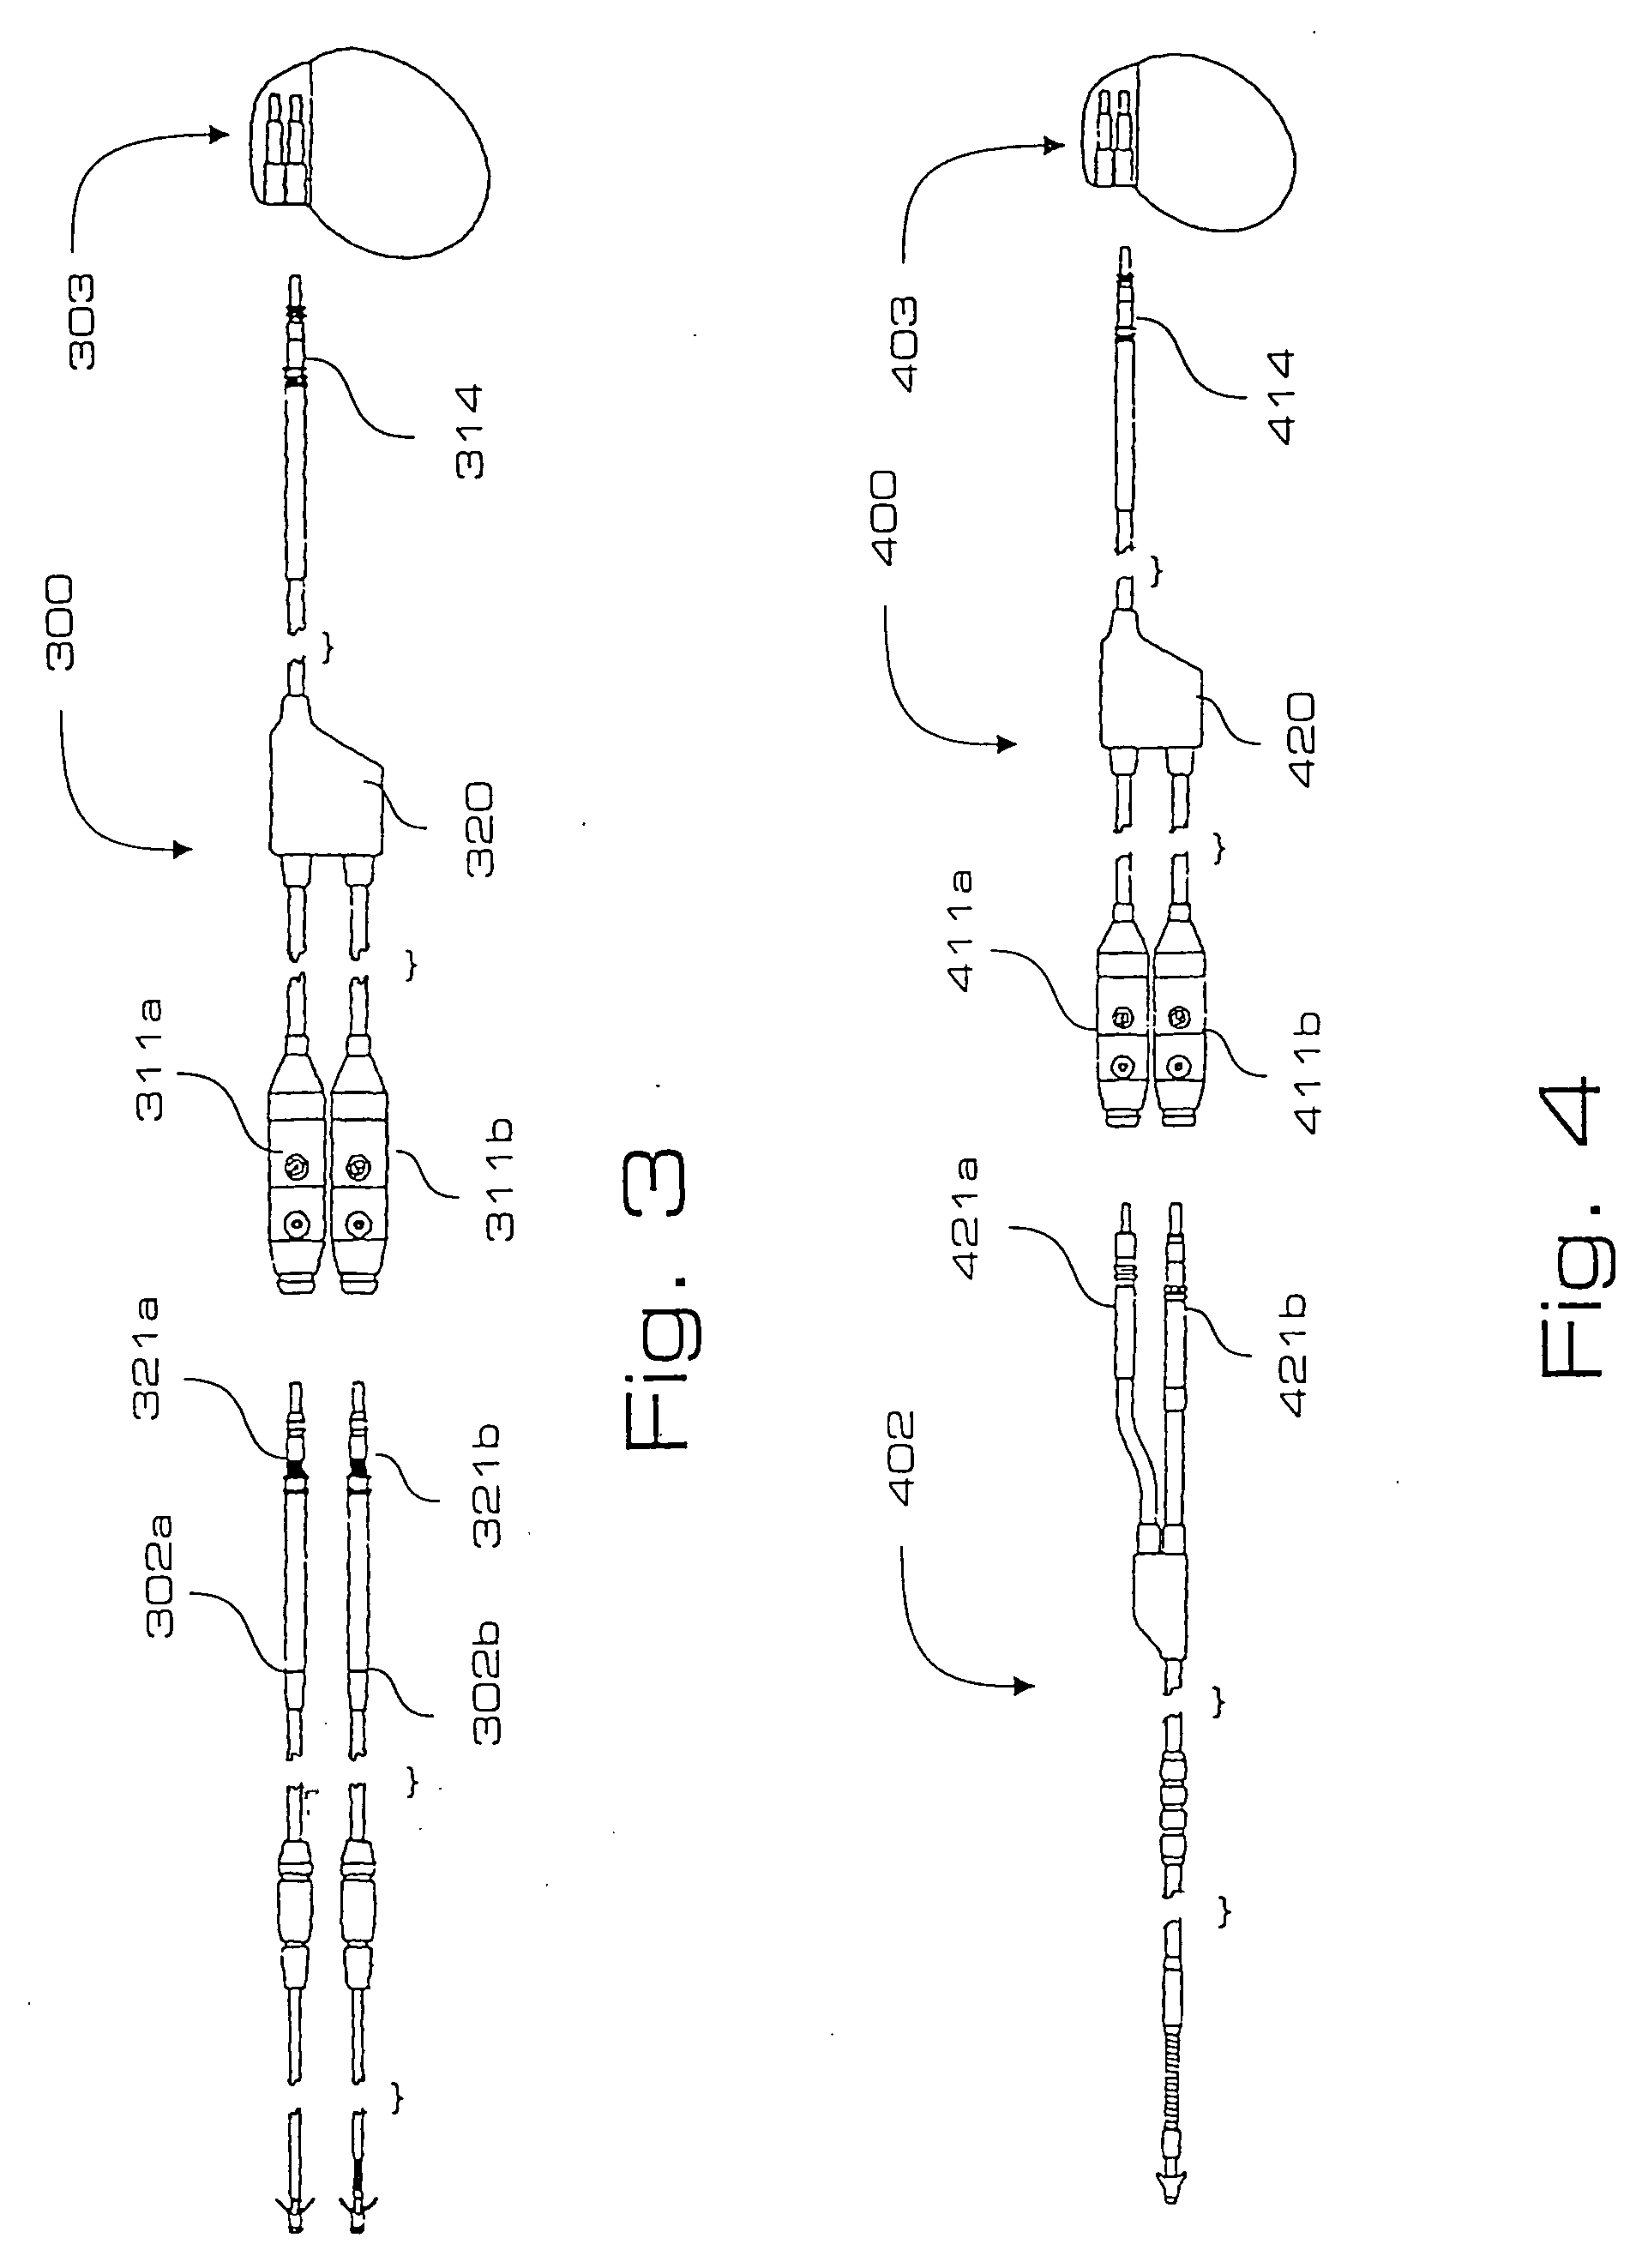 Lead adaptor having low resistance conductors and/or encapsulated housing